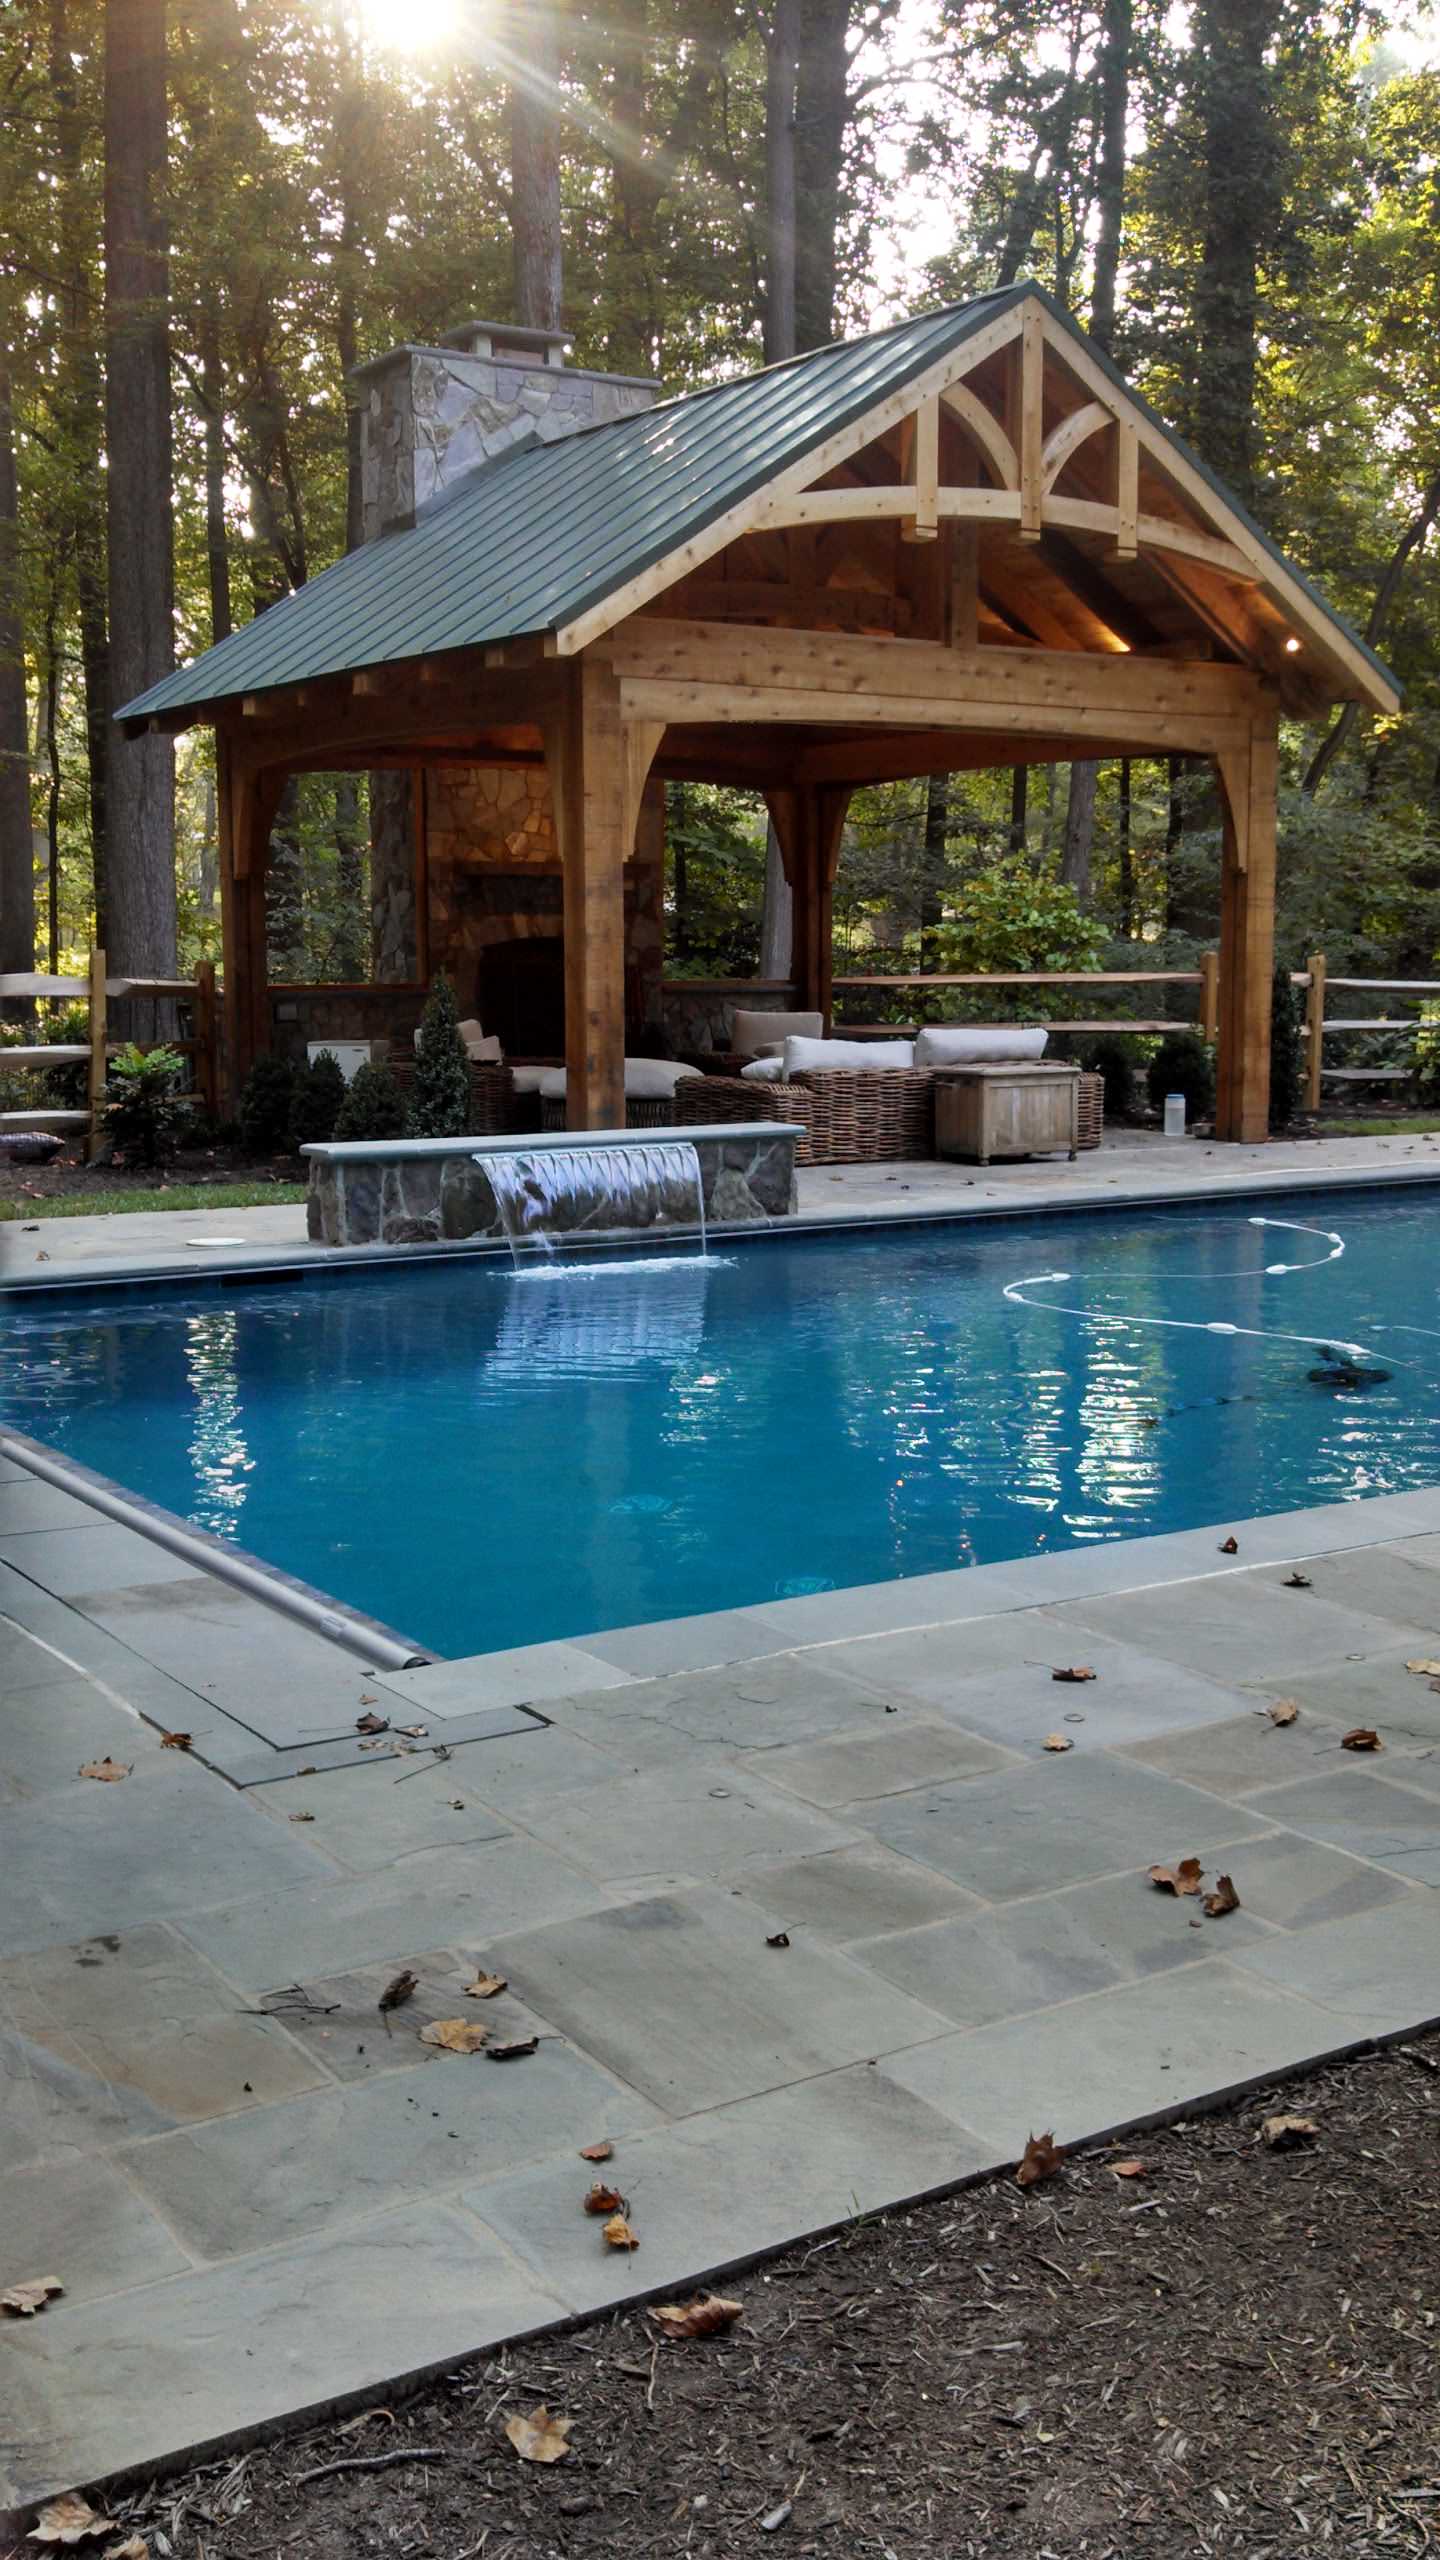 Pool in the wood